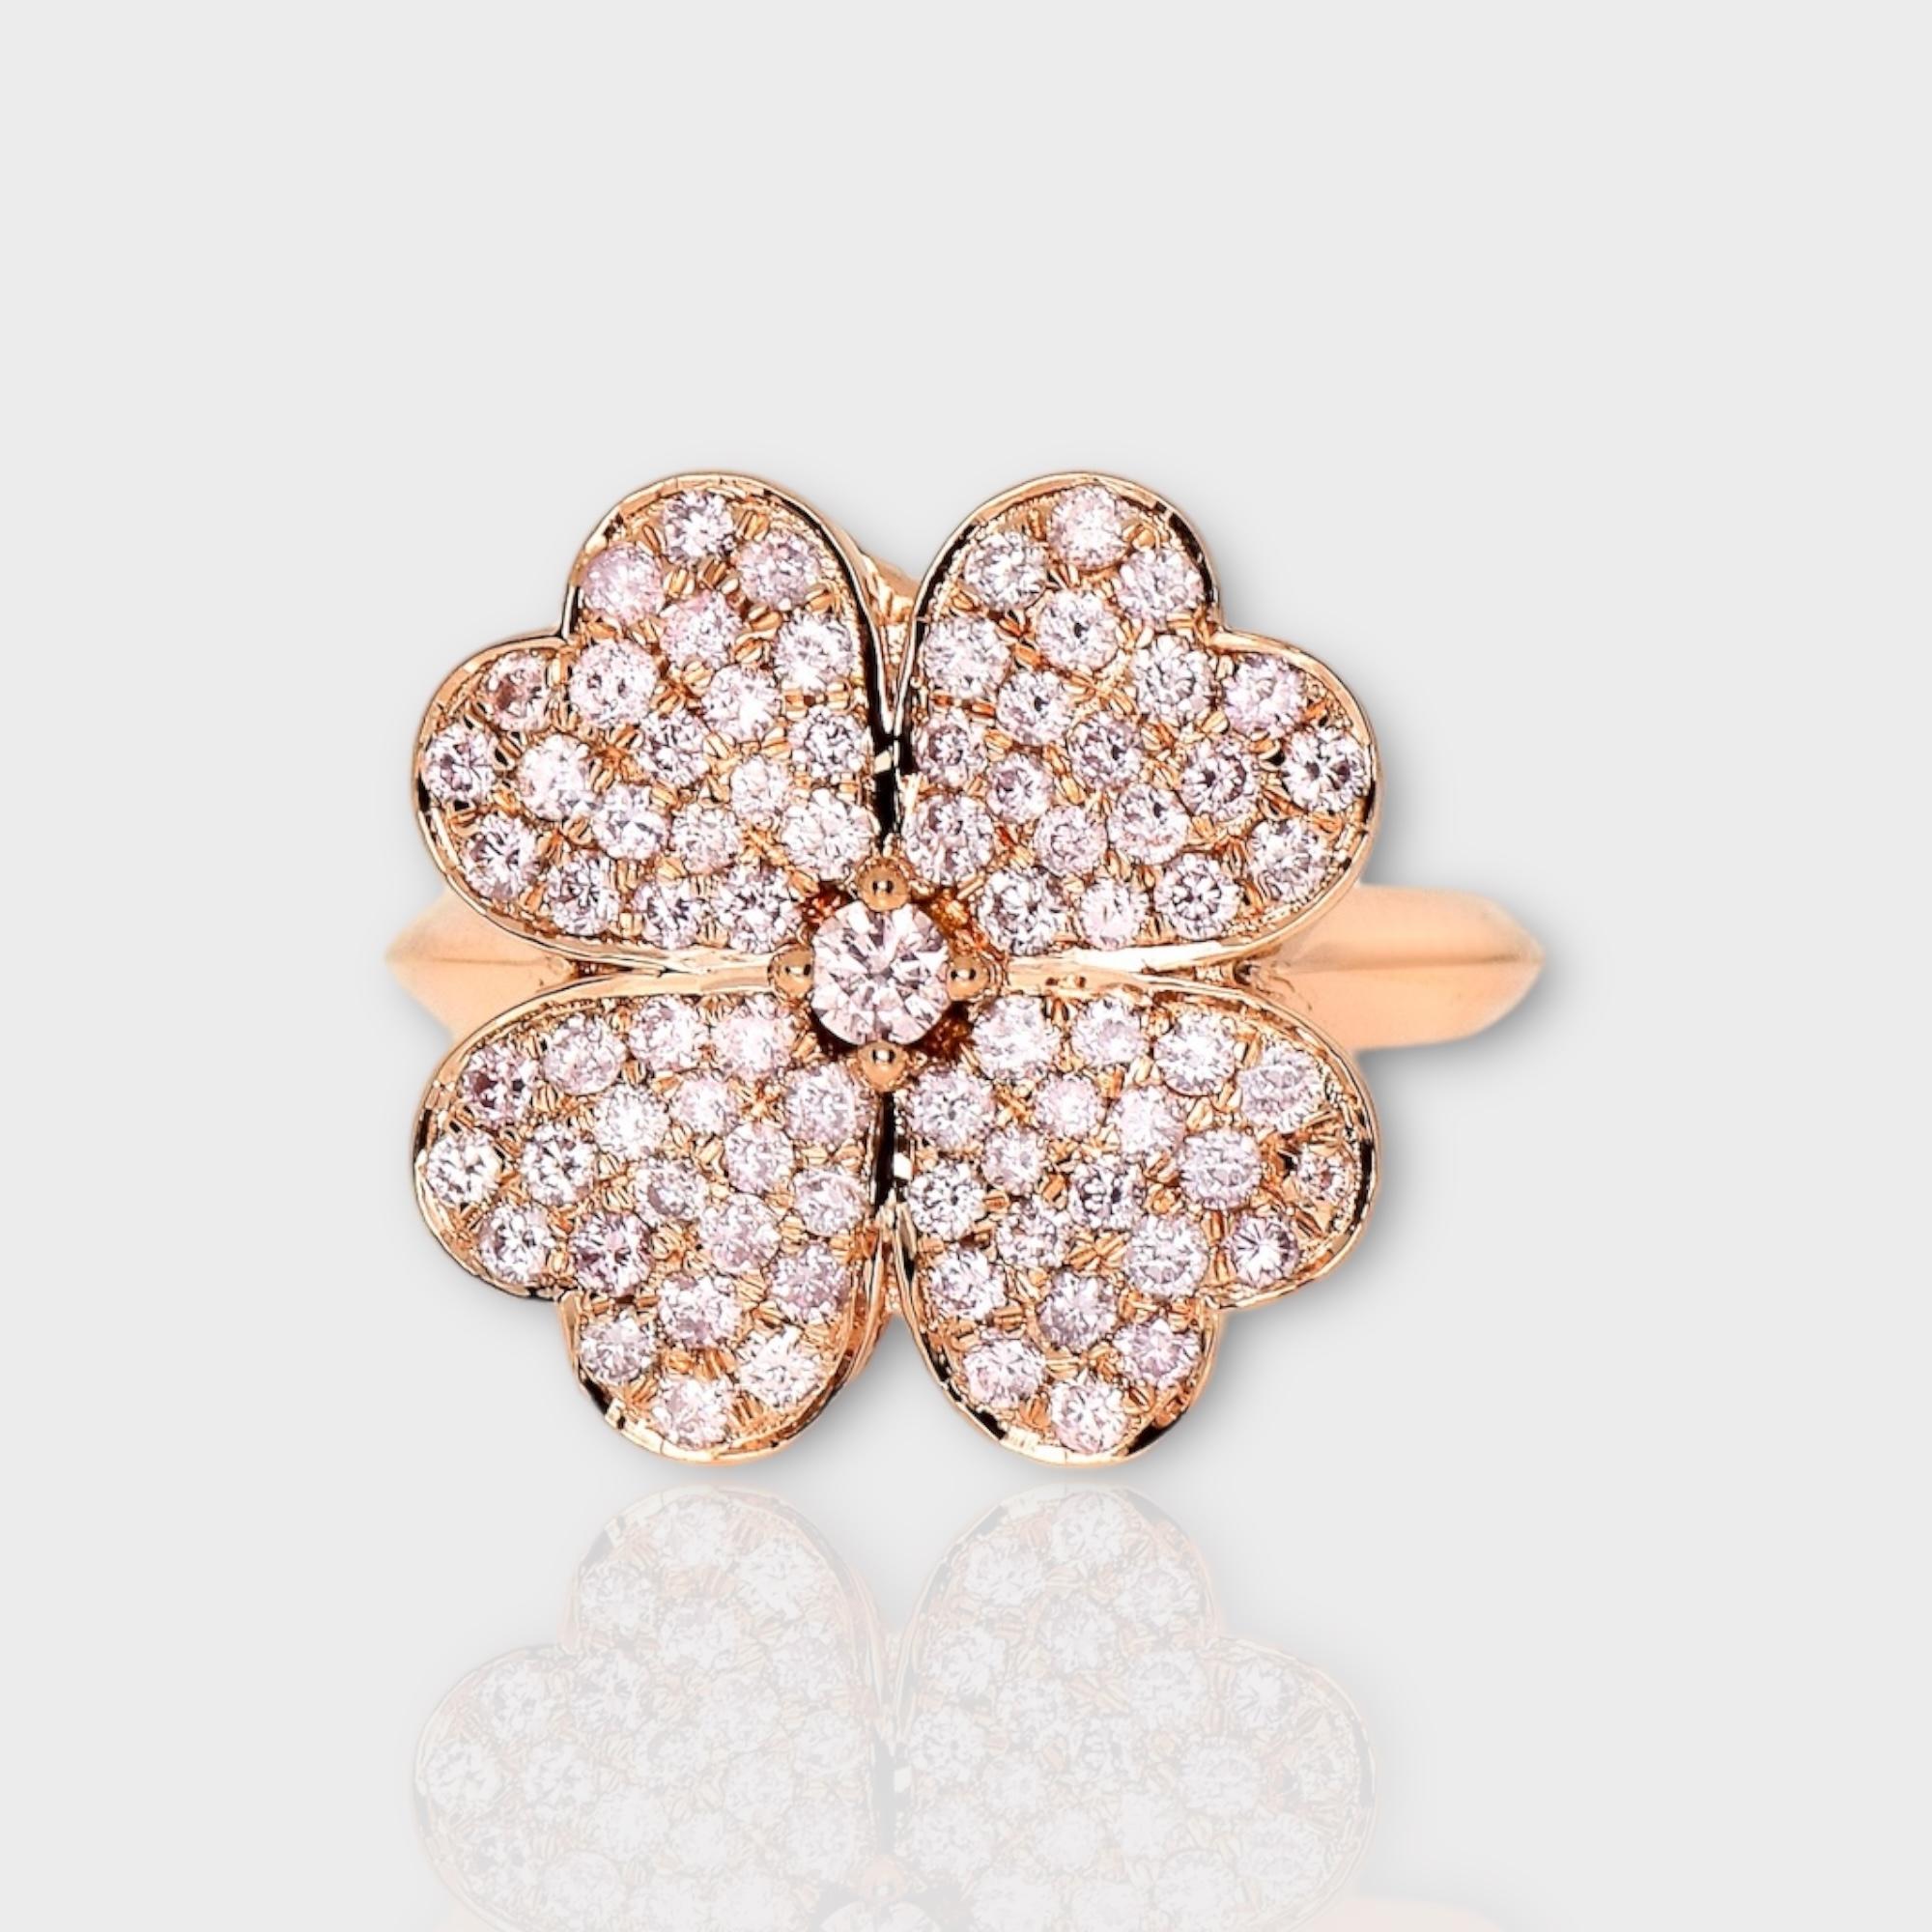 *IGI 14K 0.98 ct Natural Pink Diamonds Lucky Clover Antique Design Ring*

This band features a stunning design with a 4-leaf clover crafted from 14K rose gold. It is set with natural pink diamonds weighing 0.98 carats.

This ring features colorful